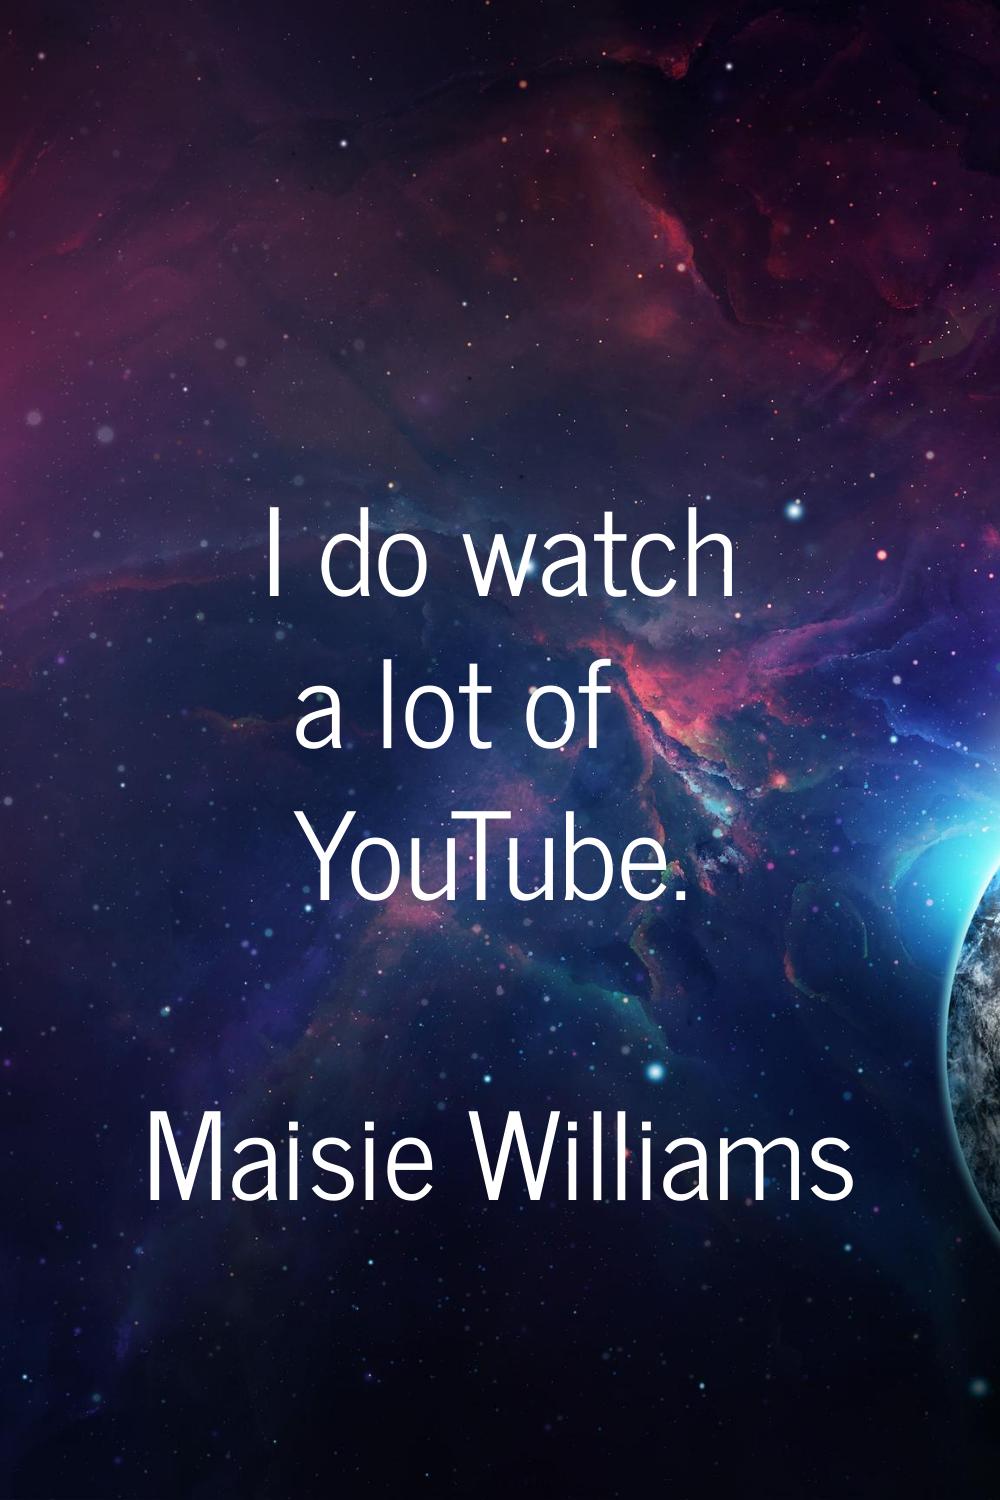 I do watch a lot of YouTube.